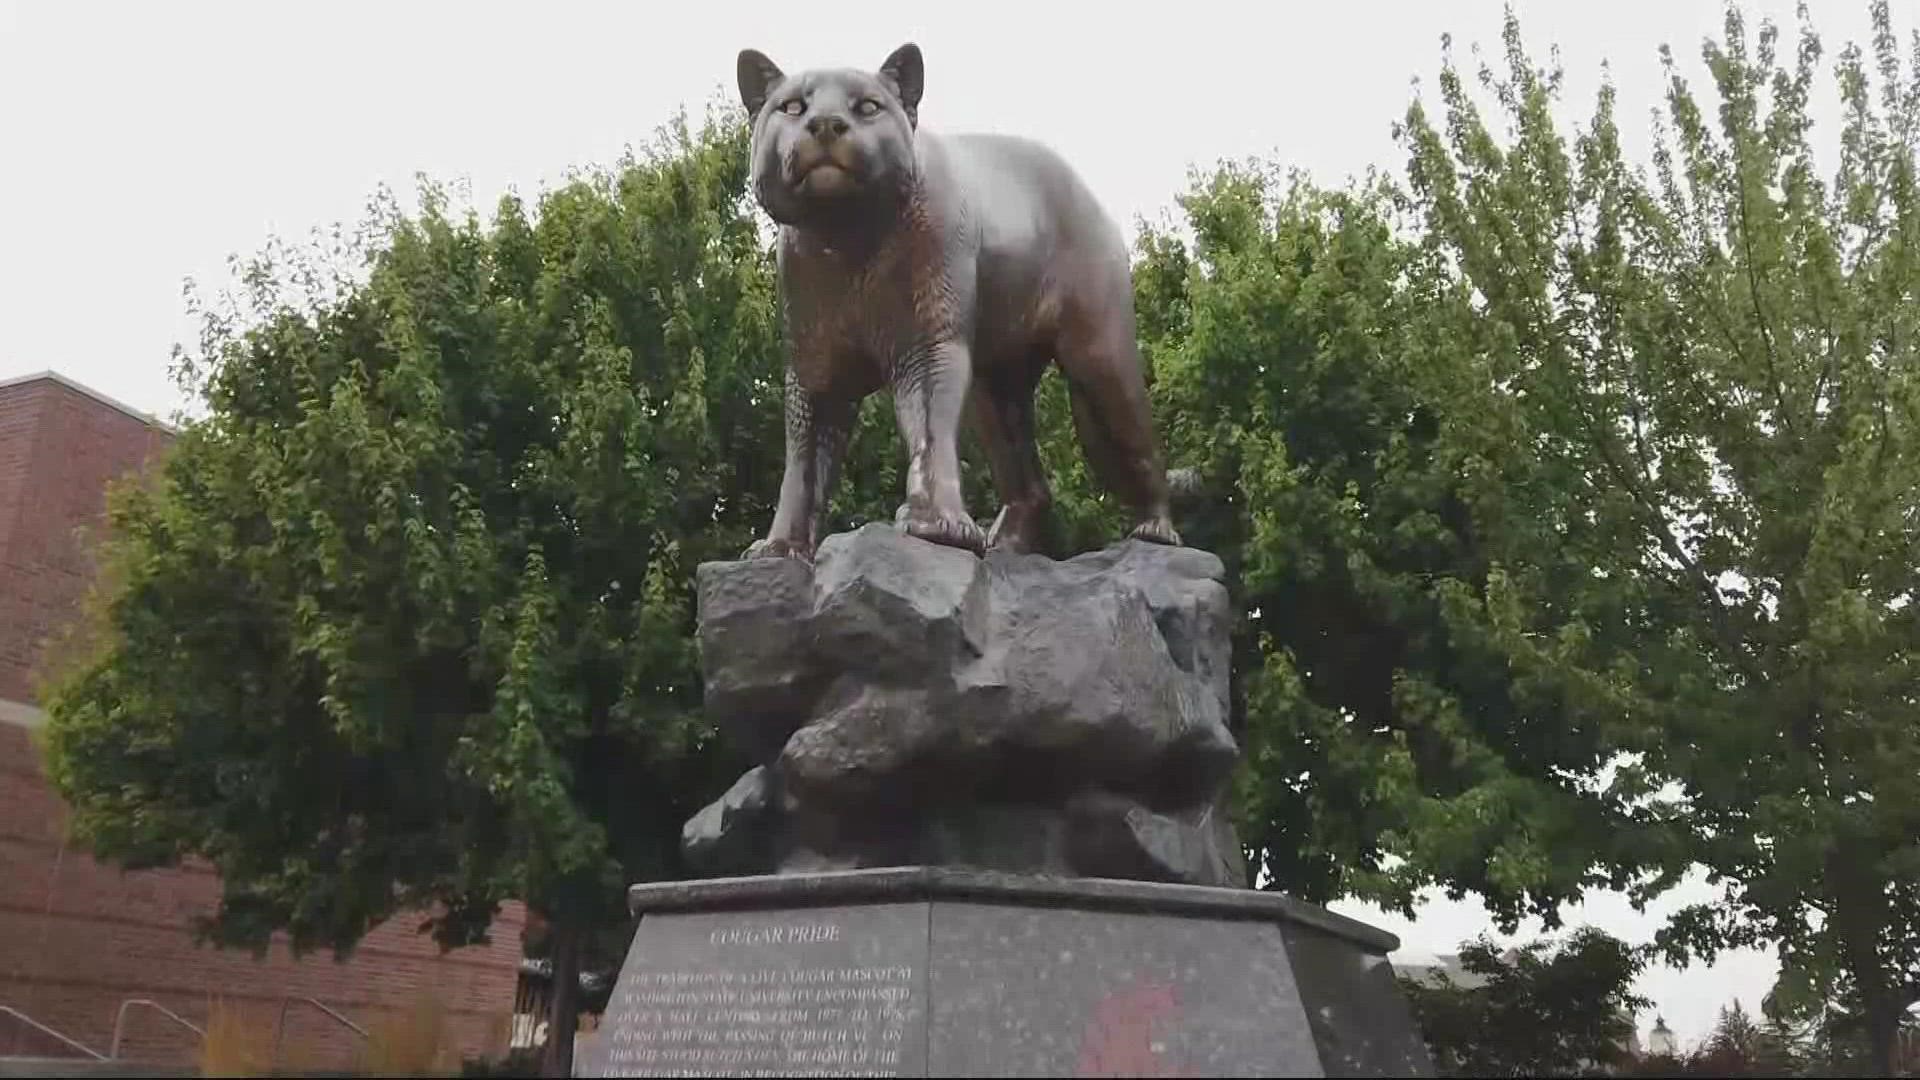 WSU welcomes students back to Pullman for Fall 2021 semester